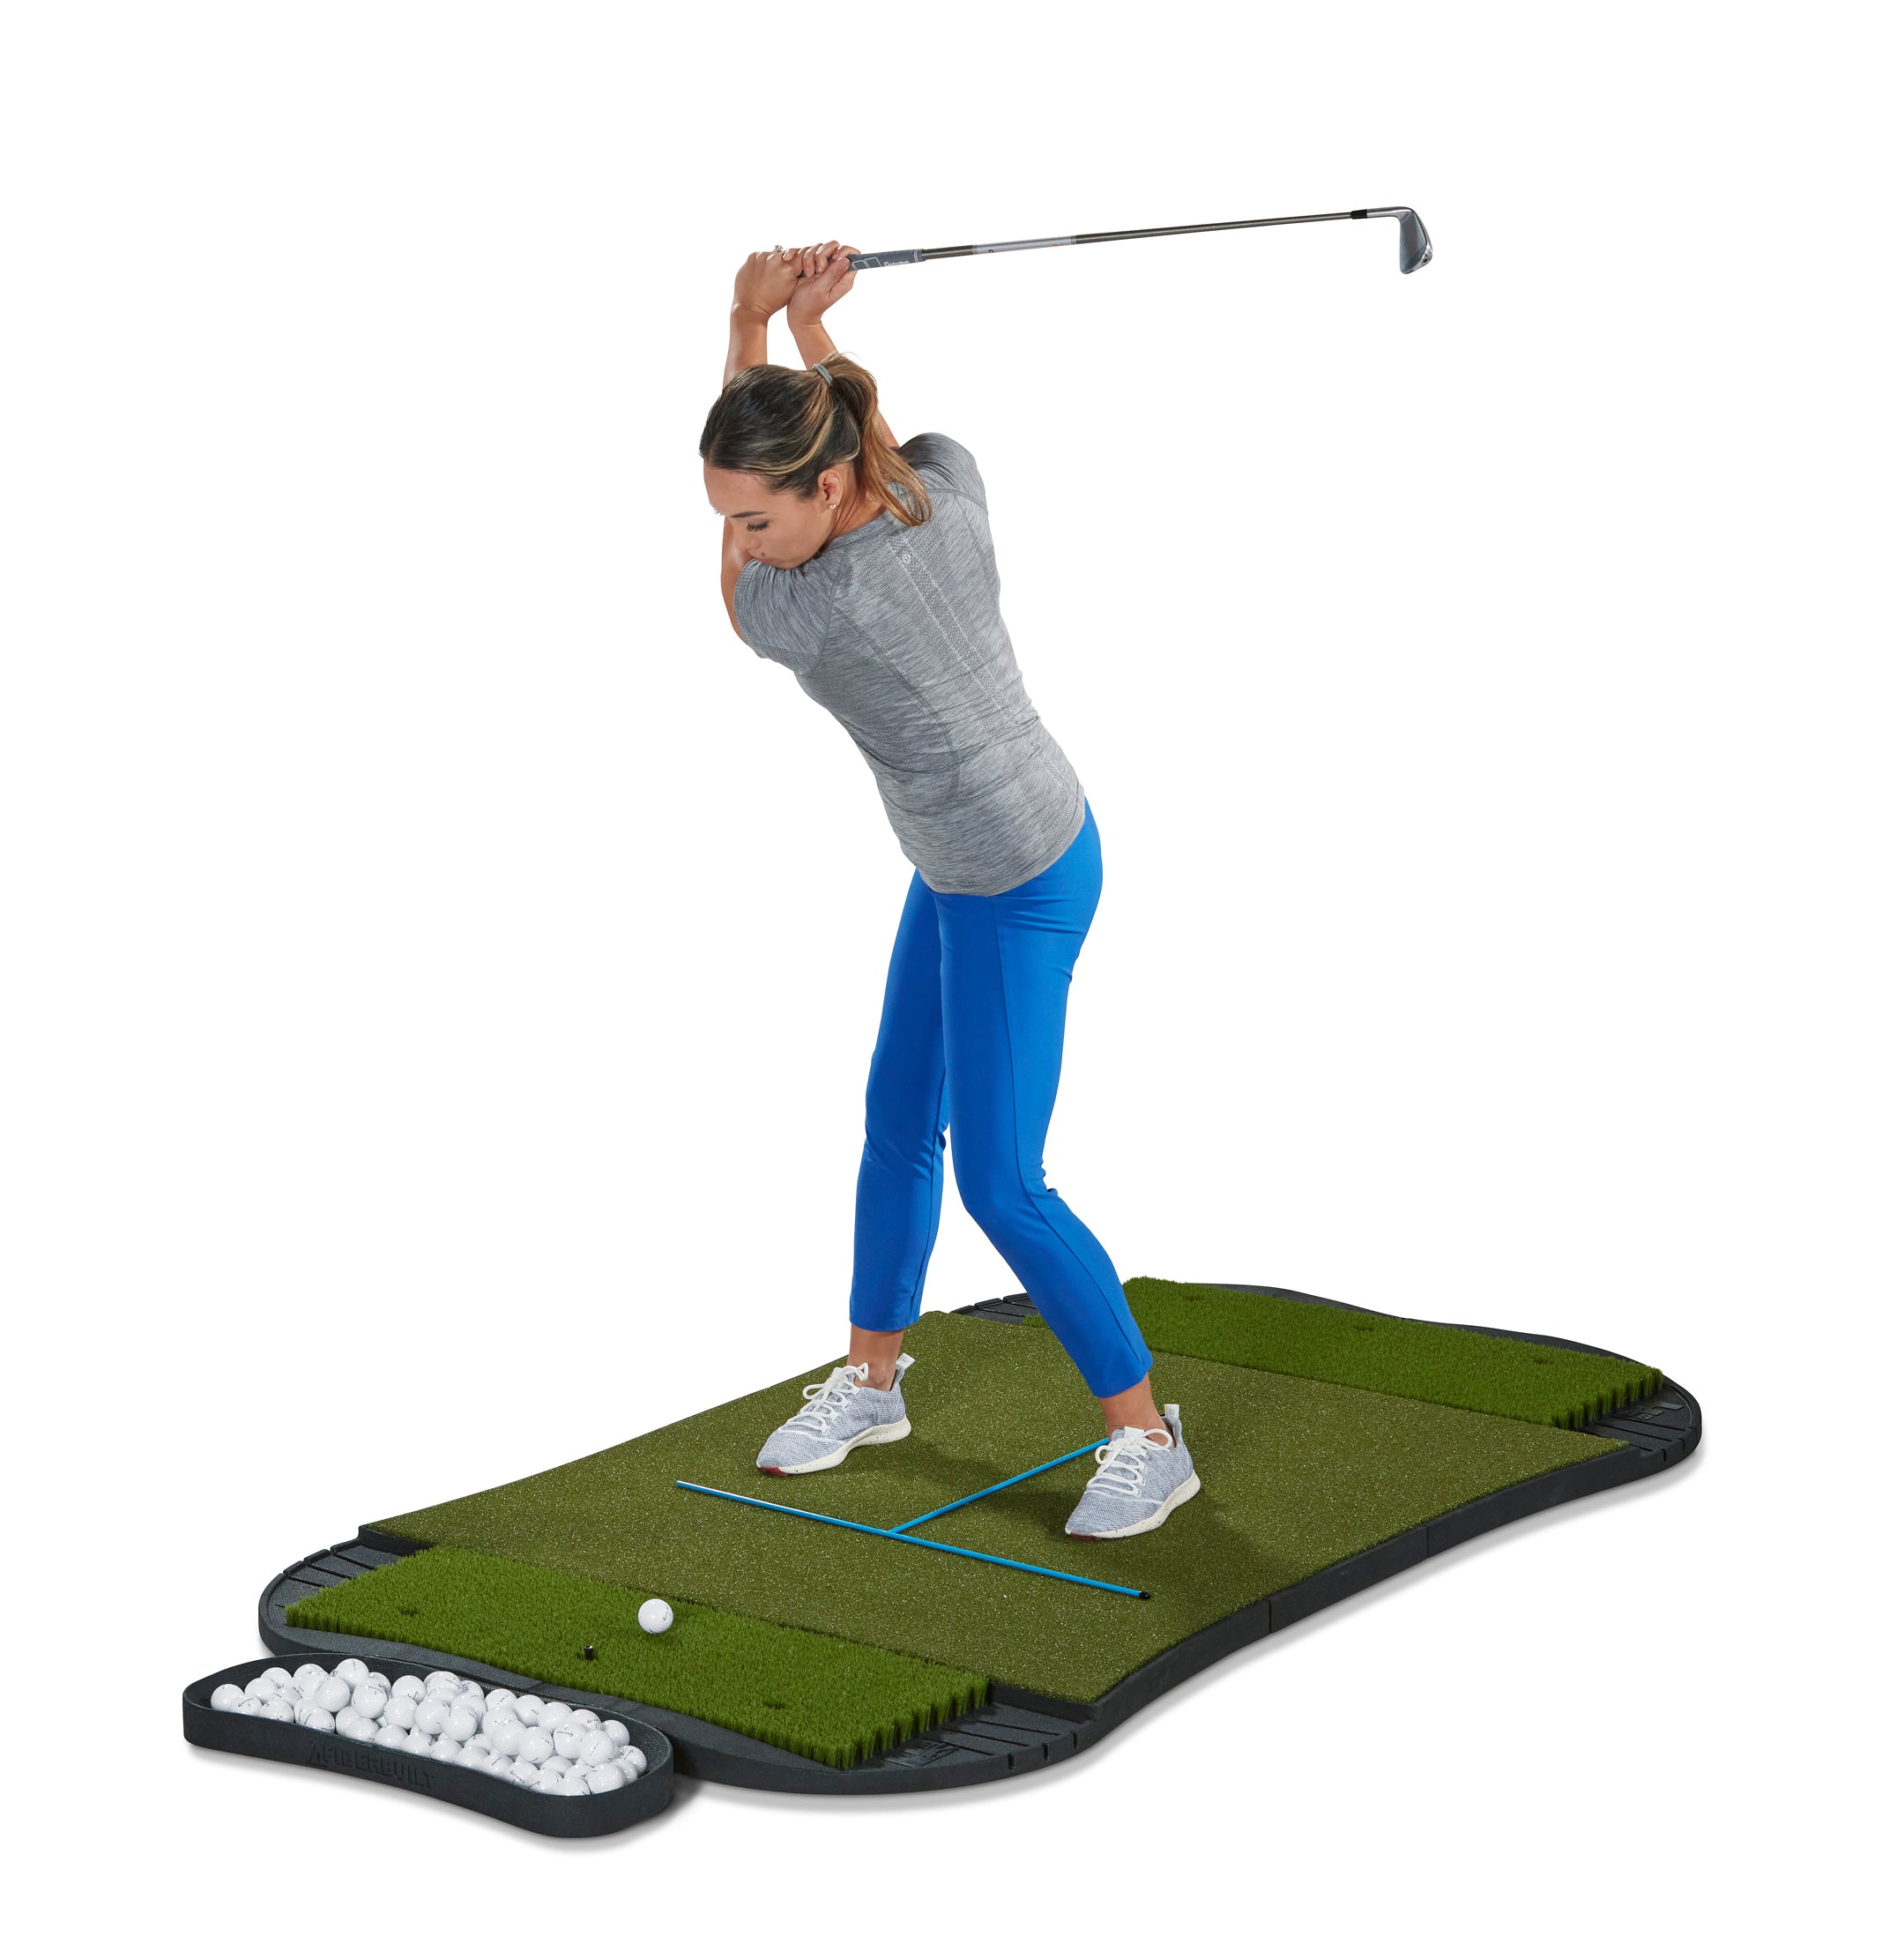 5 Best Golf Hitting Mats on  in 2022  Golf Mats Good For Outdoor  Practice 